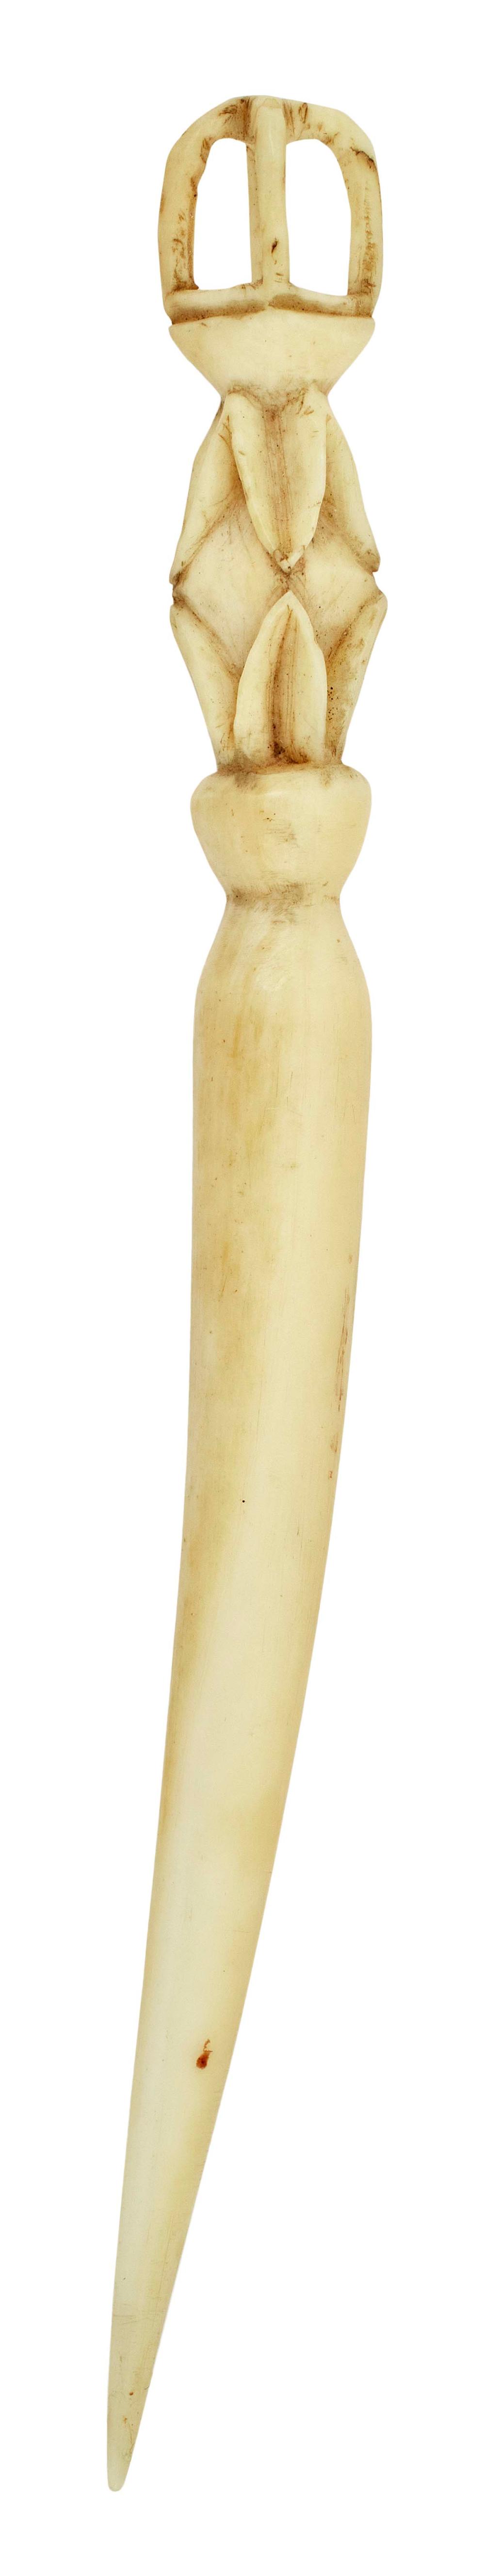 WELL CARVED WHALE IVORY BODKIN 2f1232